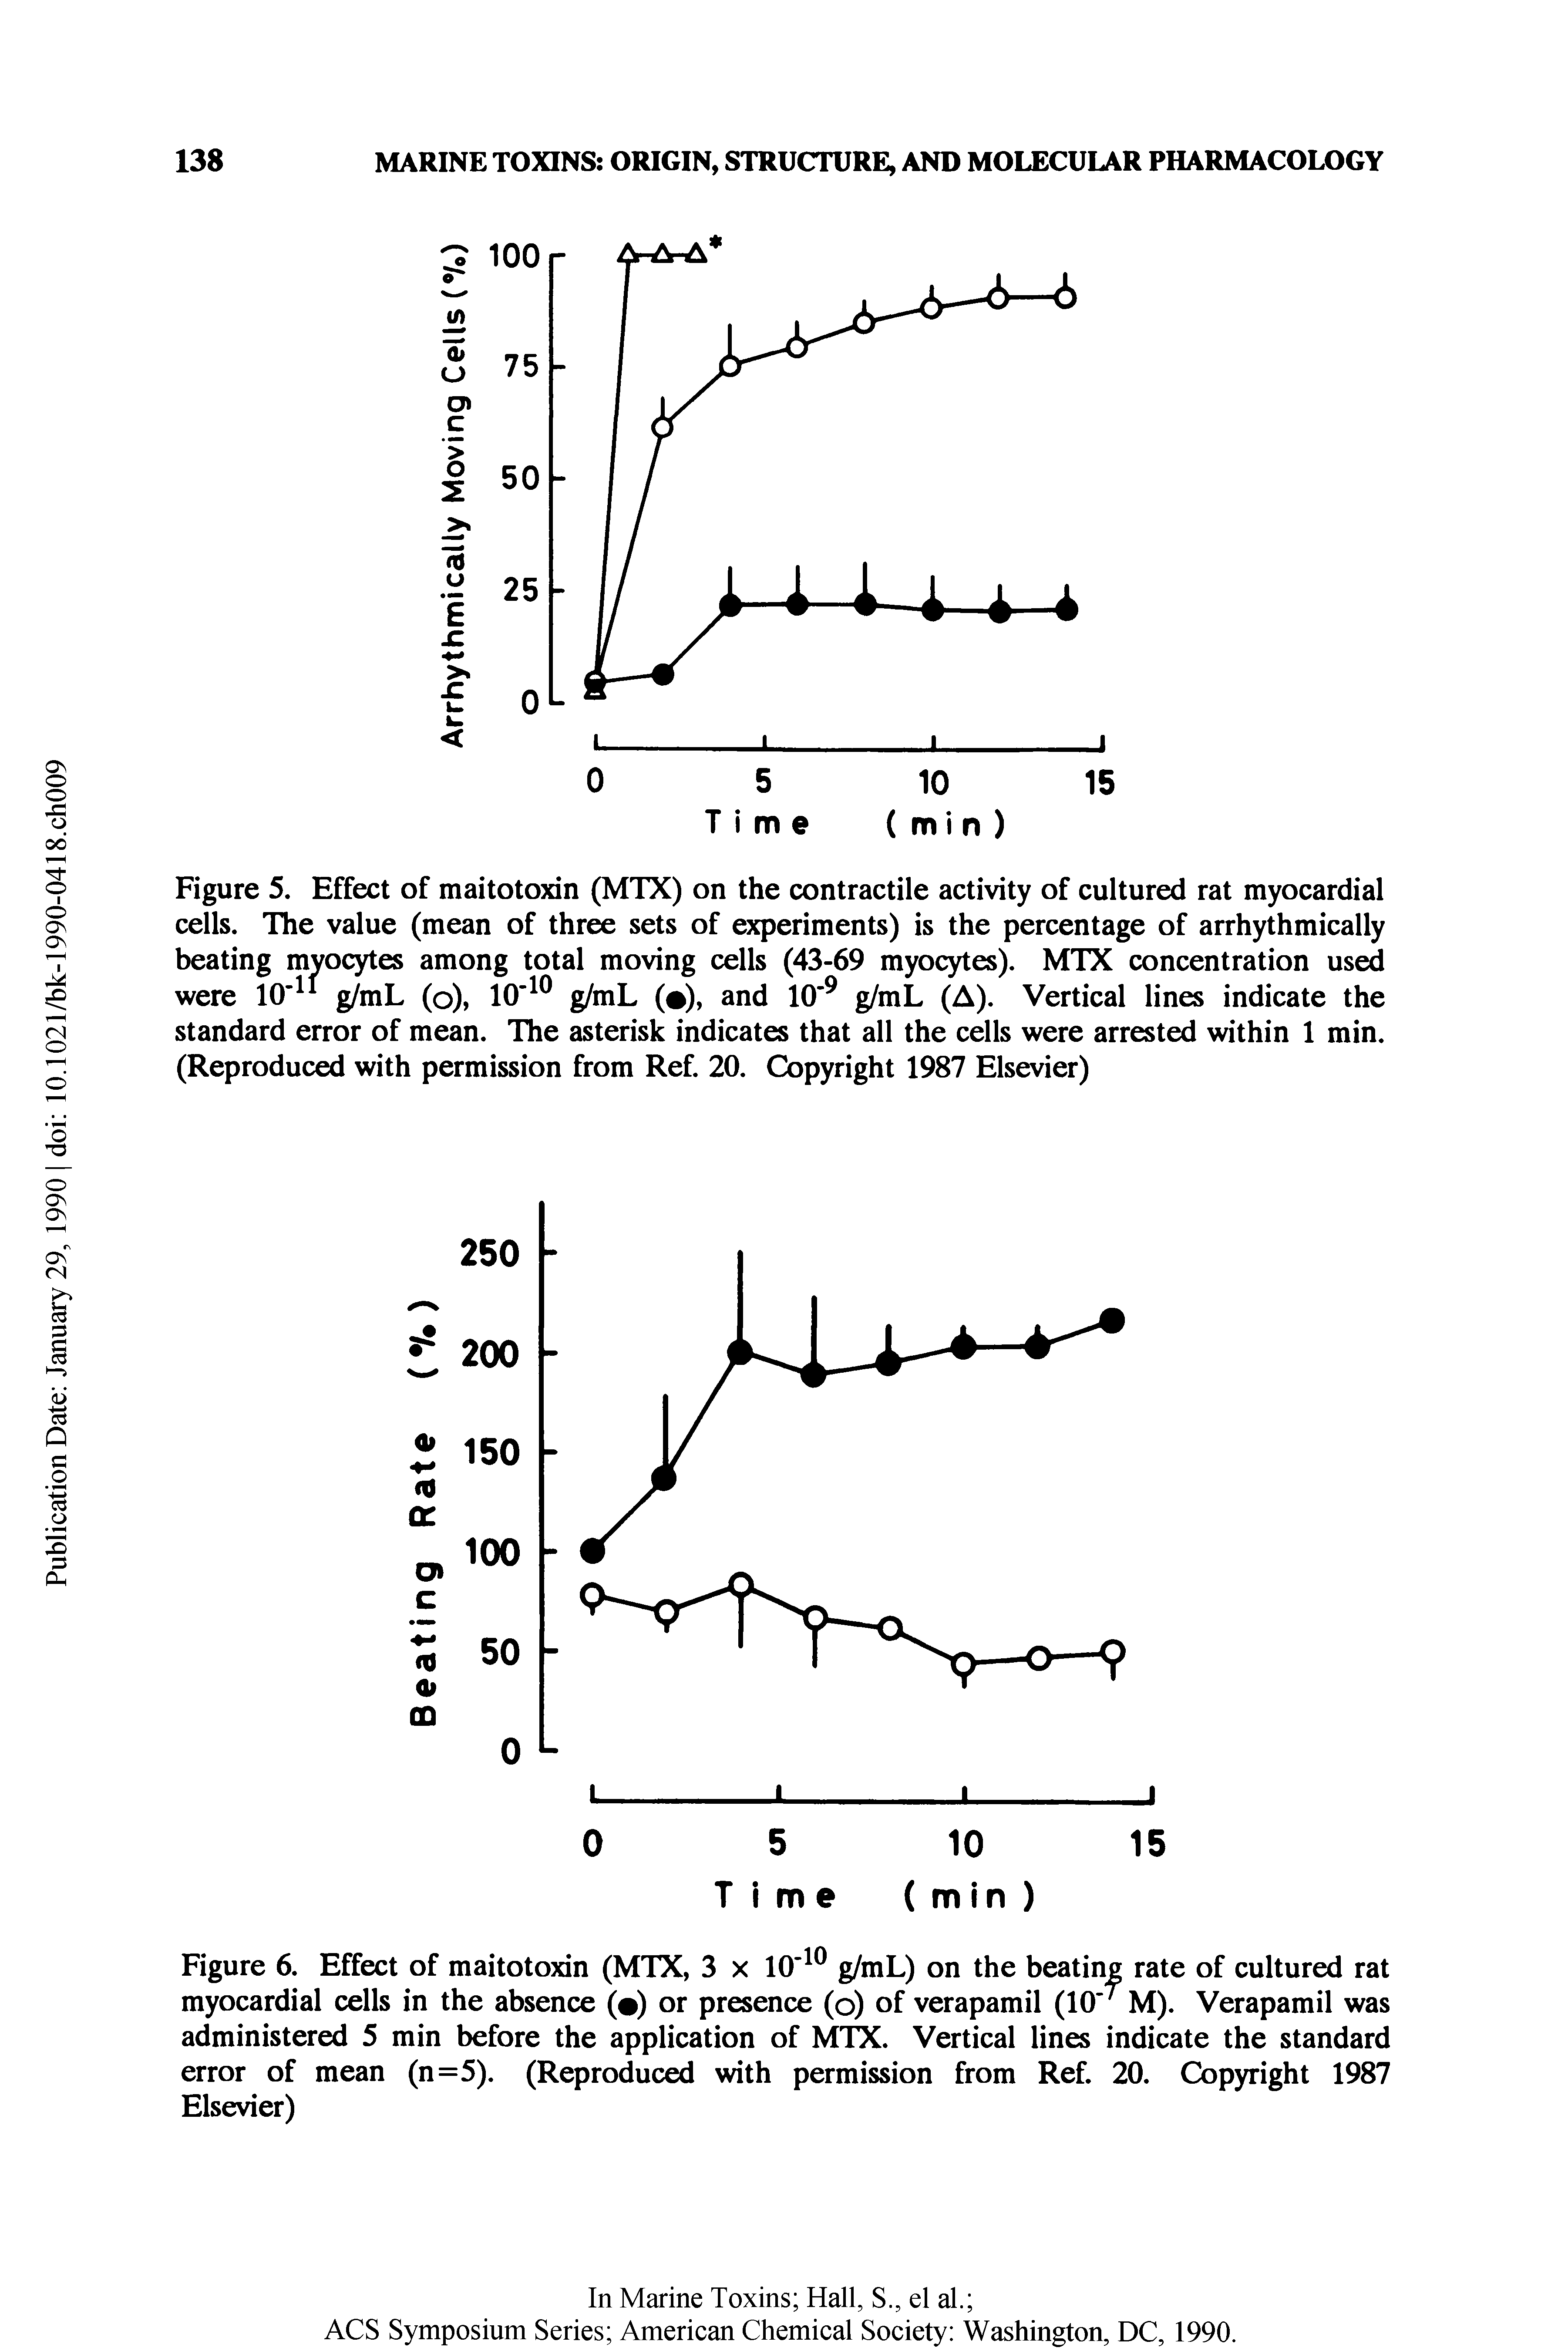 Figure 5. Effect of maitotoxin (MTX) on the contractile activity of cultured rat myocardial cells. The value (mean of three sets of experiments) is the percentage of arrhythmically beating myocytes among total moving cells (43-69 myocytes). MTX concentration used...